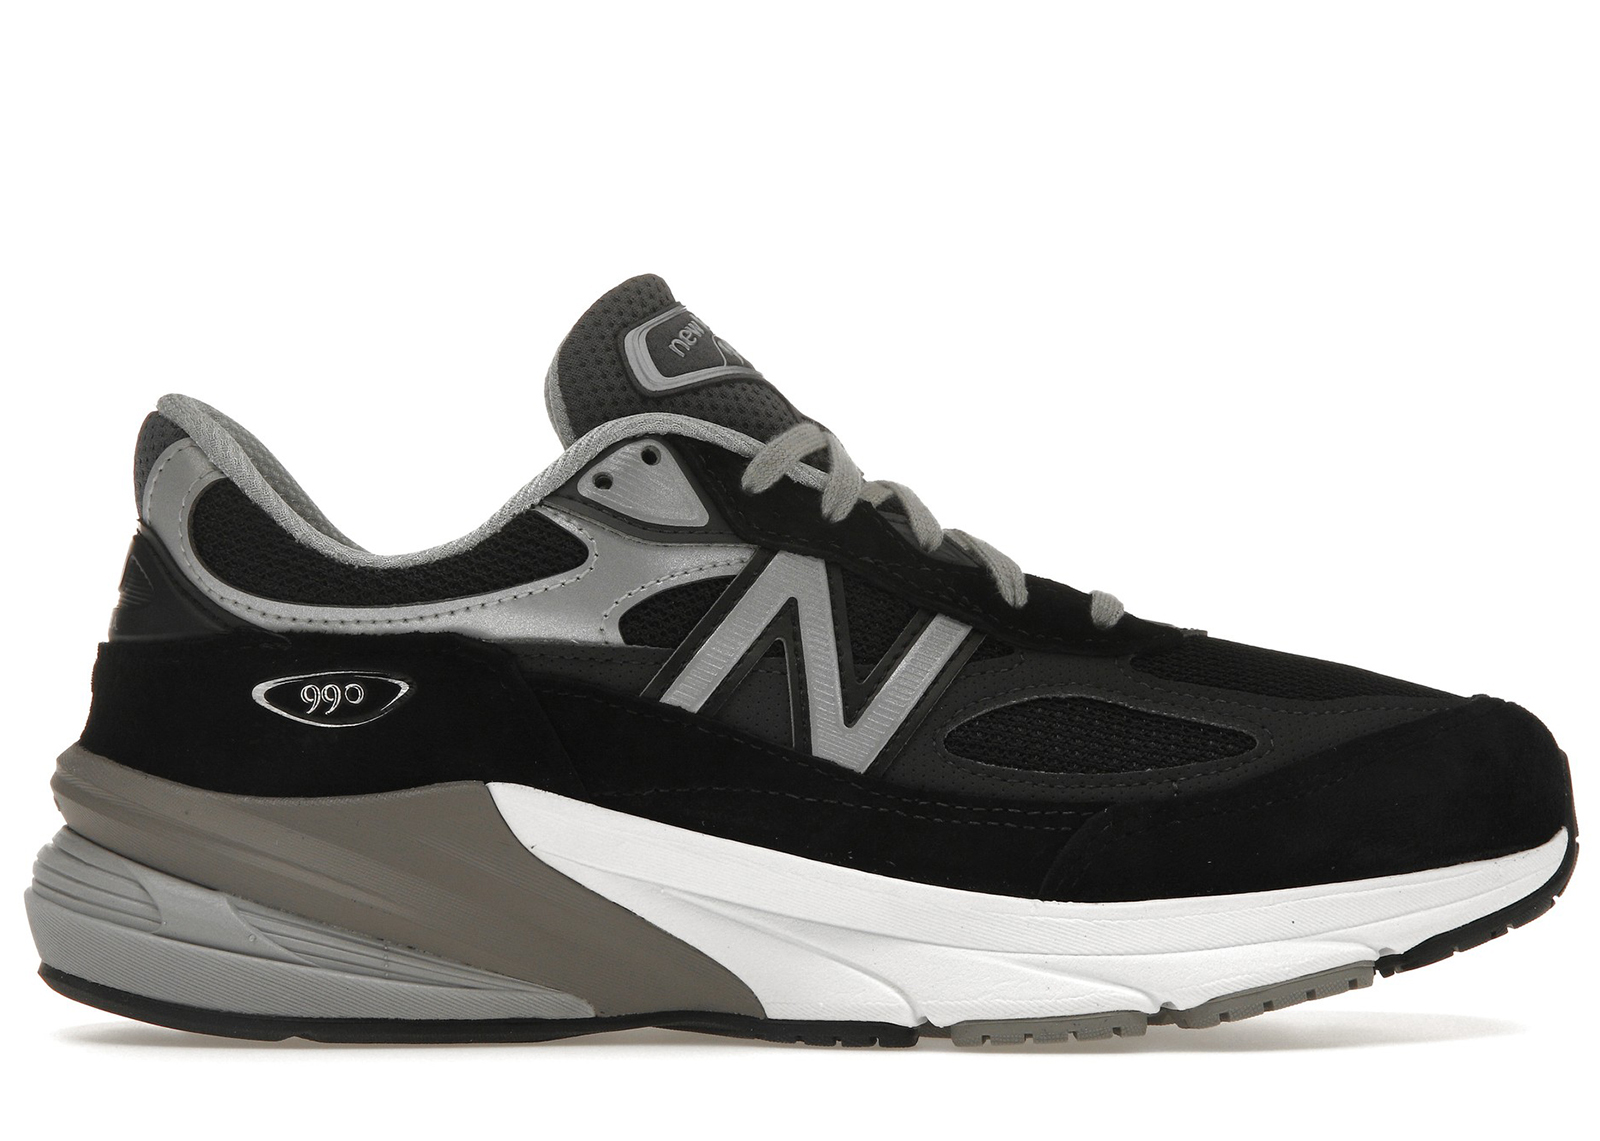 Buy New Balance 990v6 Shoes & New Sneakers - StockX